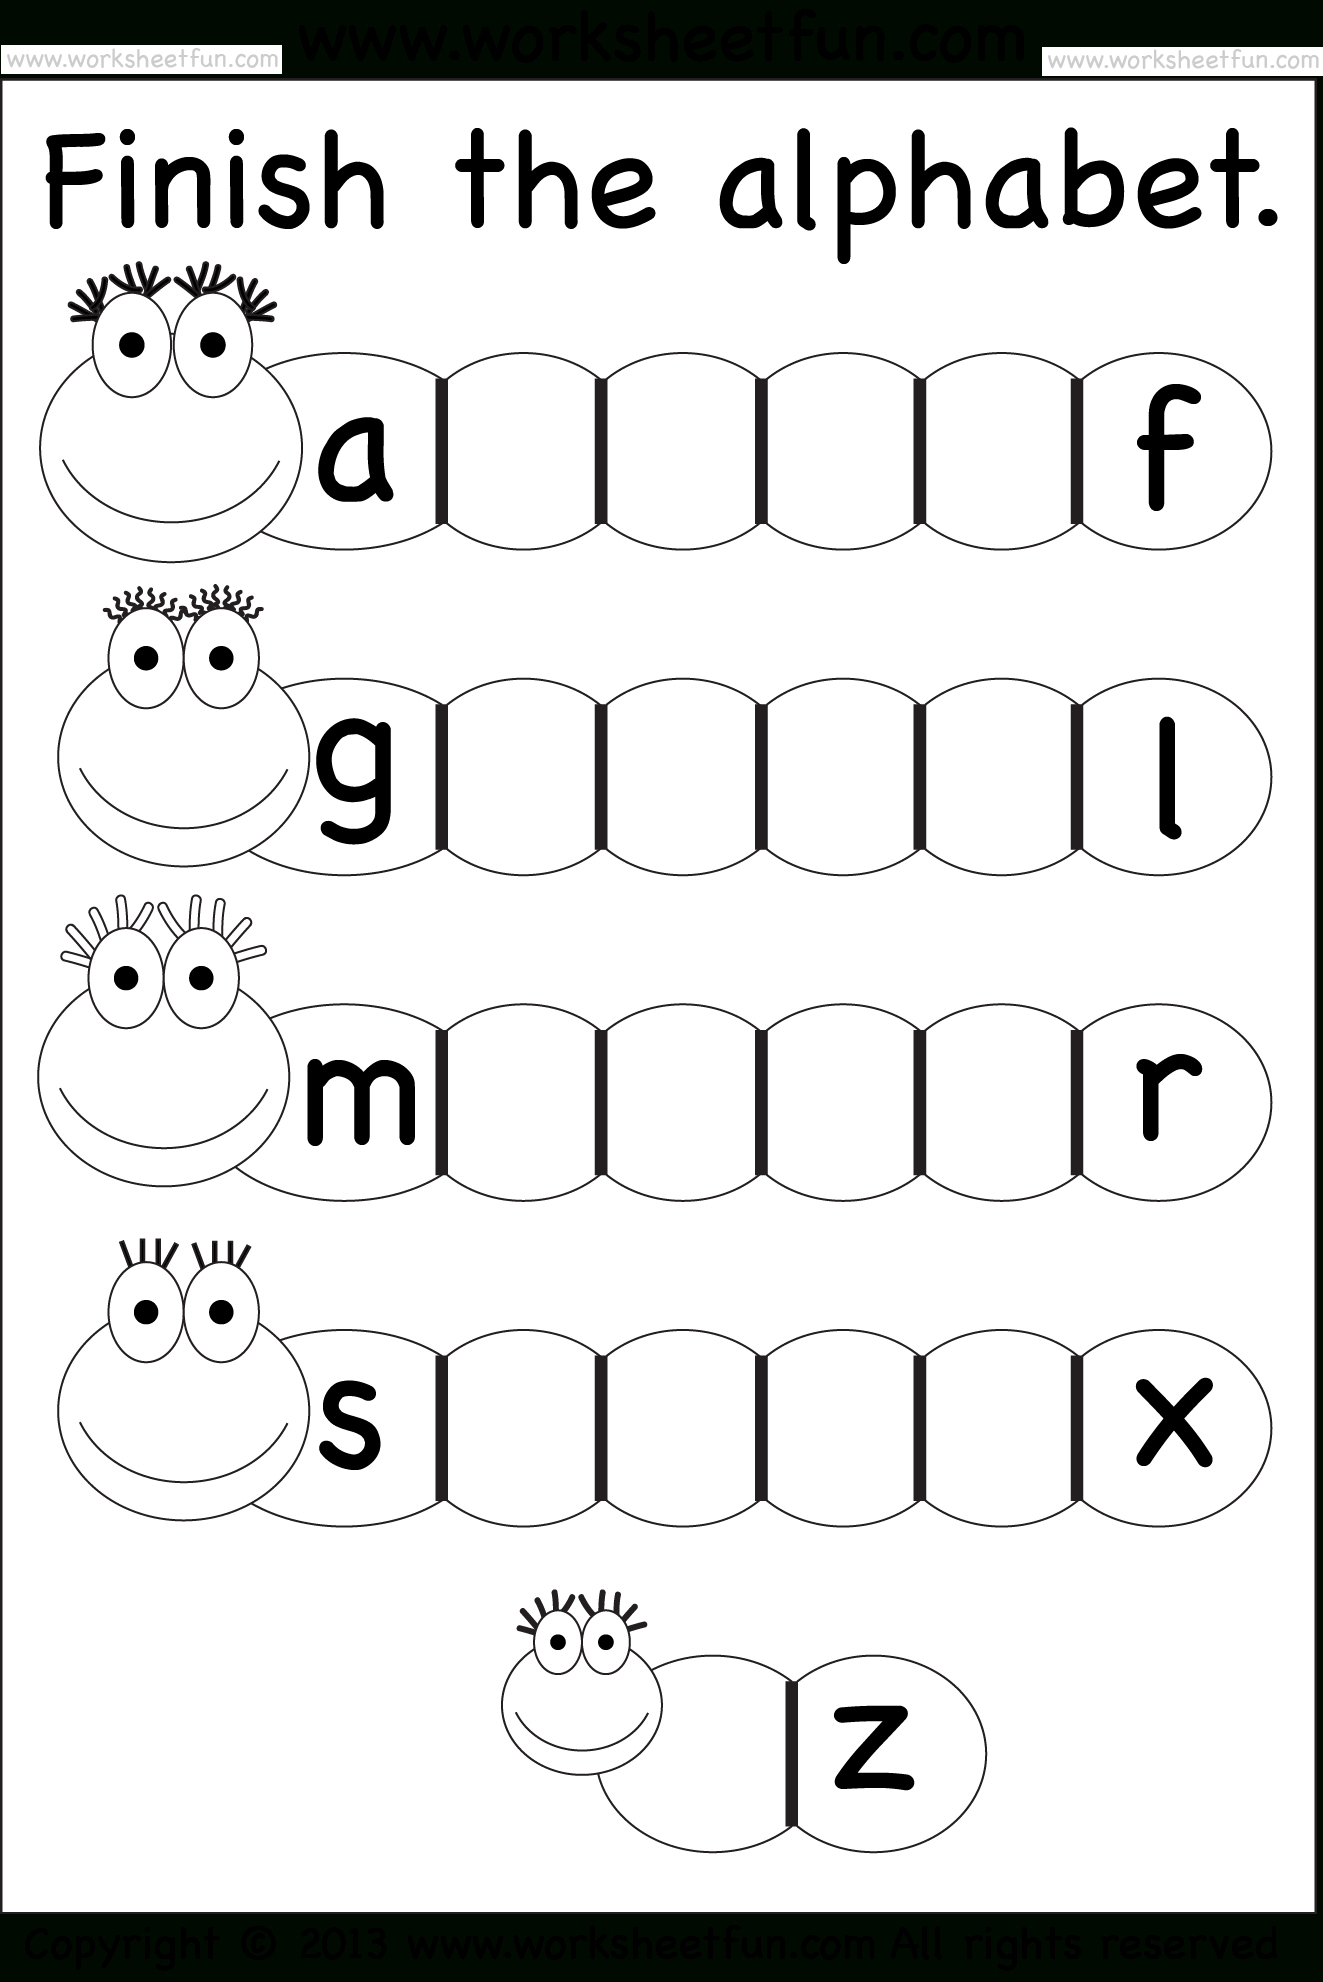 Free Printable Alphabet Worksheets For Grade 1 | Download within Alphabet Worksheets Year 1